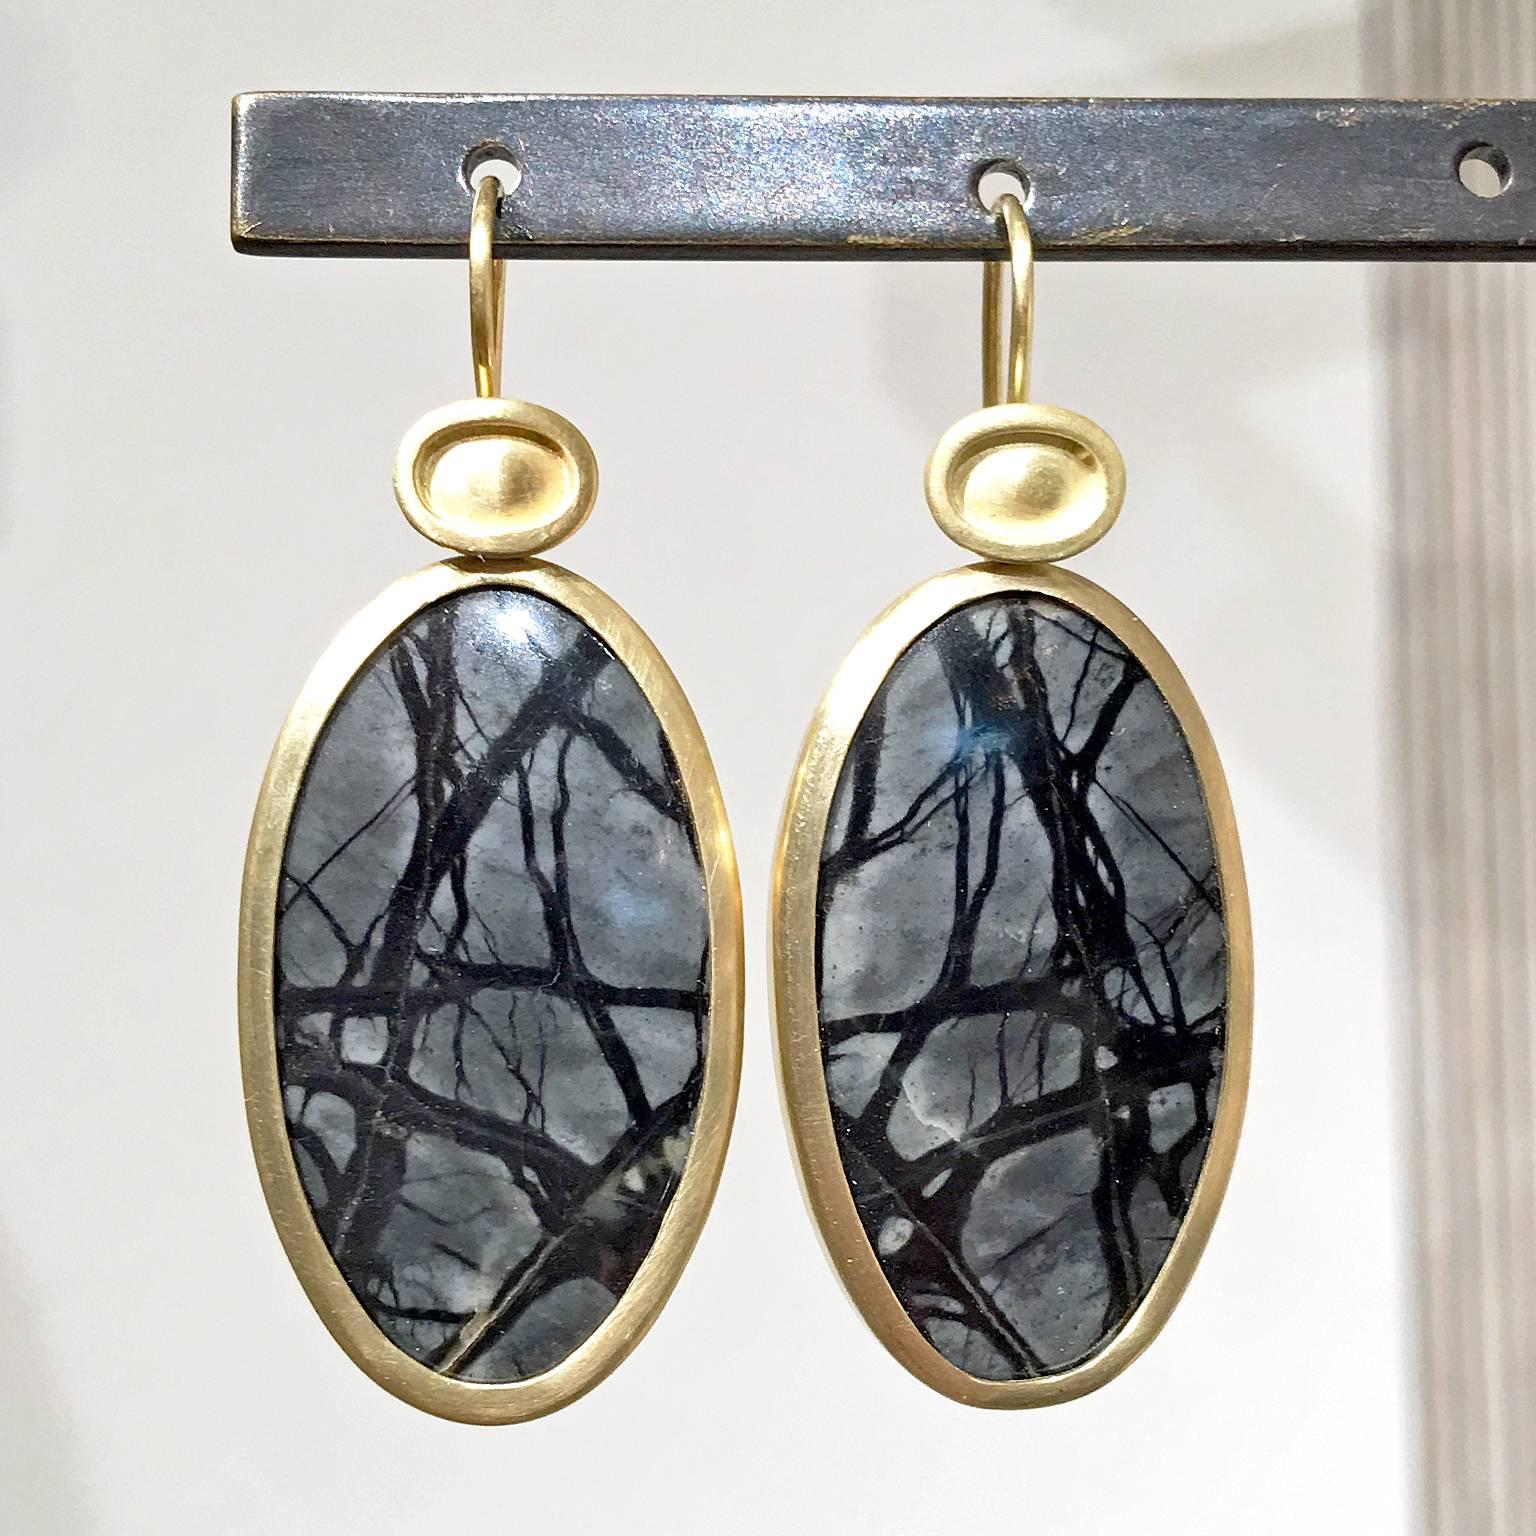 One of a Kind Drop Earrings handcrafted by jewelry artist Monica Marcella in matte finished 18k yellow gold featuring a matched pair of natural steel-toned gray and black jasper cabochons bezel-set below Monica's signature shield elements and